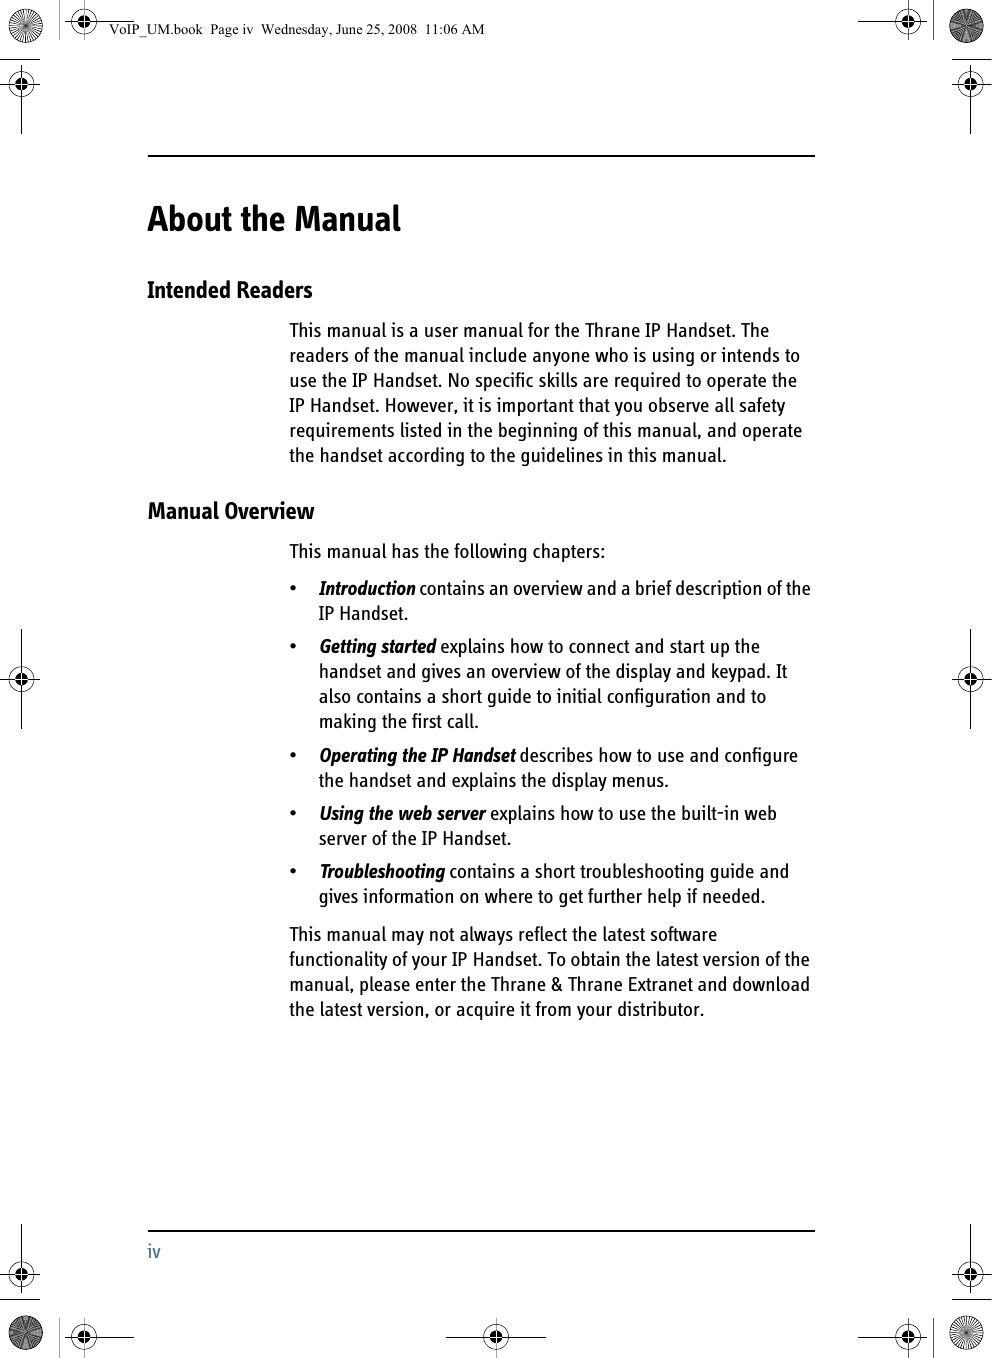 ivAbout the Manual 2Intended ReadersThis manual is a user manual for the Thrane IP Handset. The readers of the manual include anyone who is using or intends to use the IP Handset. No specific skills are required to operate the IP Handset. However, it is important that you observe all safety requirements listed in the beginning of this manual, and operate the handset according to the guidelines in this manual. Manual OverviewThis manual has the following chapters:•Introduction contains an overview and a brief description of the IP Handset.•Getting started explains how to connect and start up the handset and gives an overview of the display and keypad. It also contains a short guide to initial configuration and to making the first call.•Operating the IP Handset describes how to use and configure the handset and explains the display menus.•Using the web server explains how to use the built-in web server of the IP Handset.•Troubleshooting contains a short troubleshooting guide and gives information on where to get further help if needed.This manual may not always reflect the latest software functionality of your IP Handset. To obtain the latest version of the manual, please enter the Thrane &amp; Thrane Extranet and download the latest version, or acquire it from your distributor.VoIP_UM.book  Page iv  Wednesday, June 25, 2008  11:06 AM